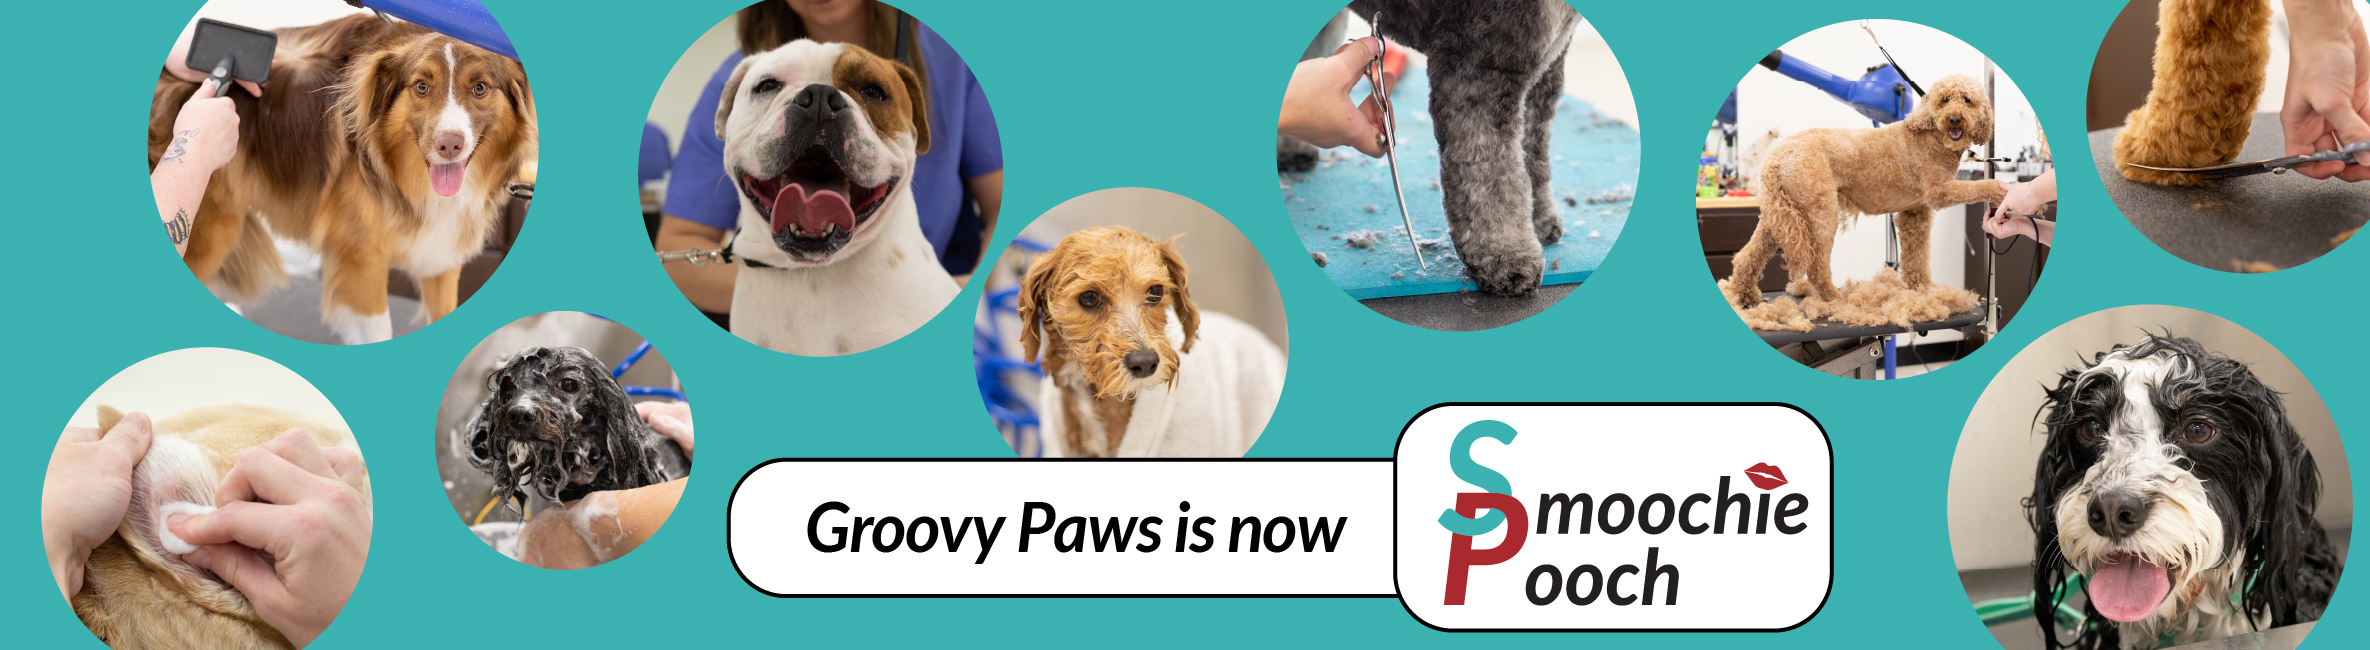 Groovy Paws Smoochie Pooch Dog Grooming Near Me Lafayette IN